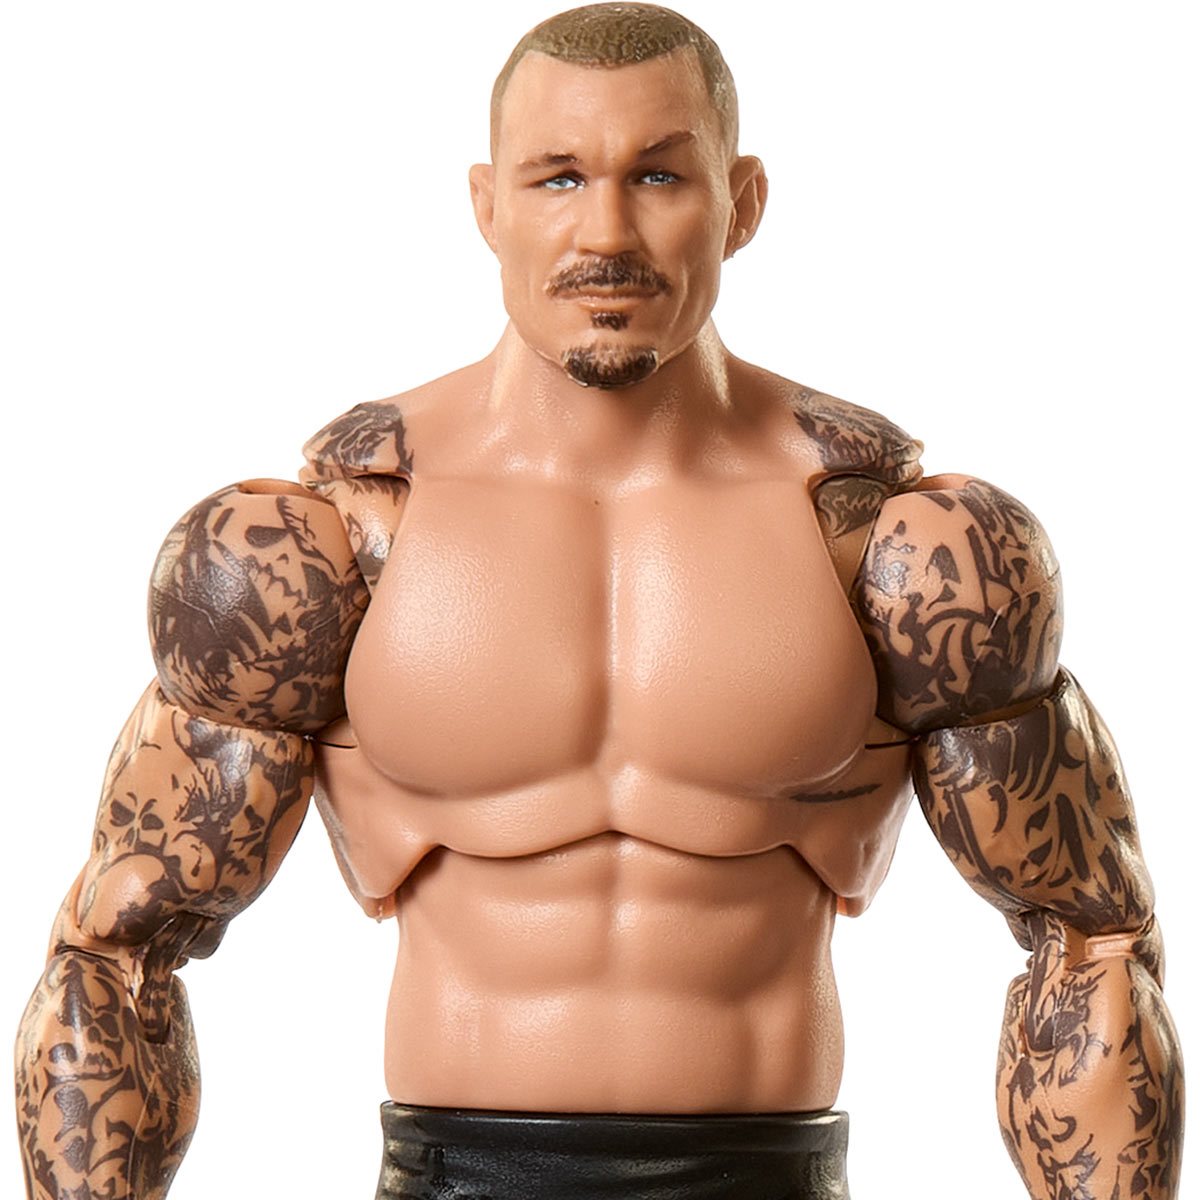 WWE Ultimate Edition Wave 18 Randy Orton Action Figure